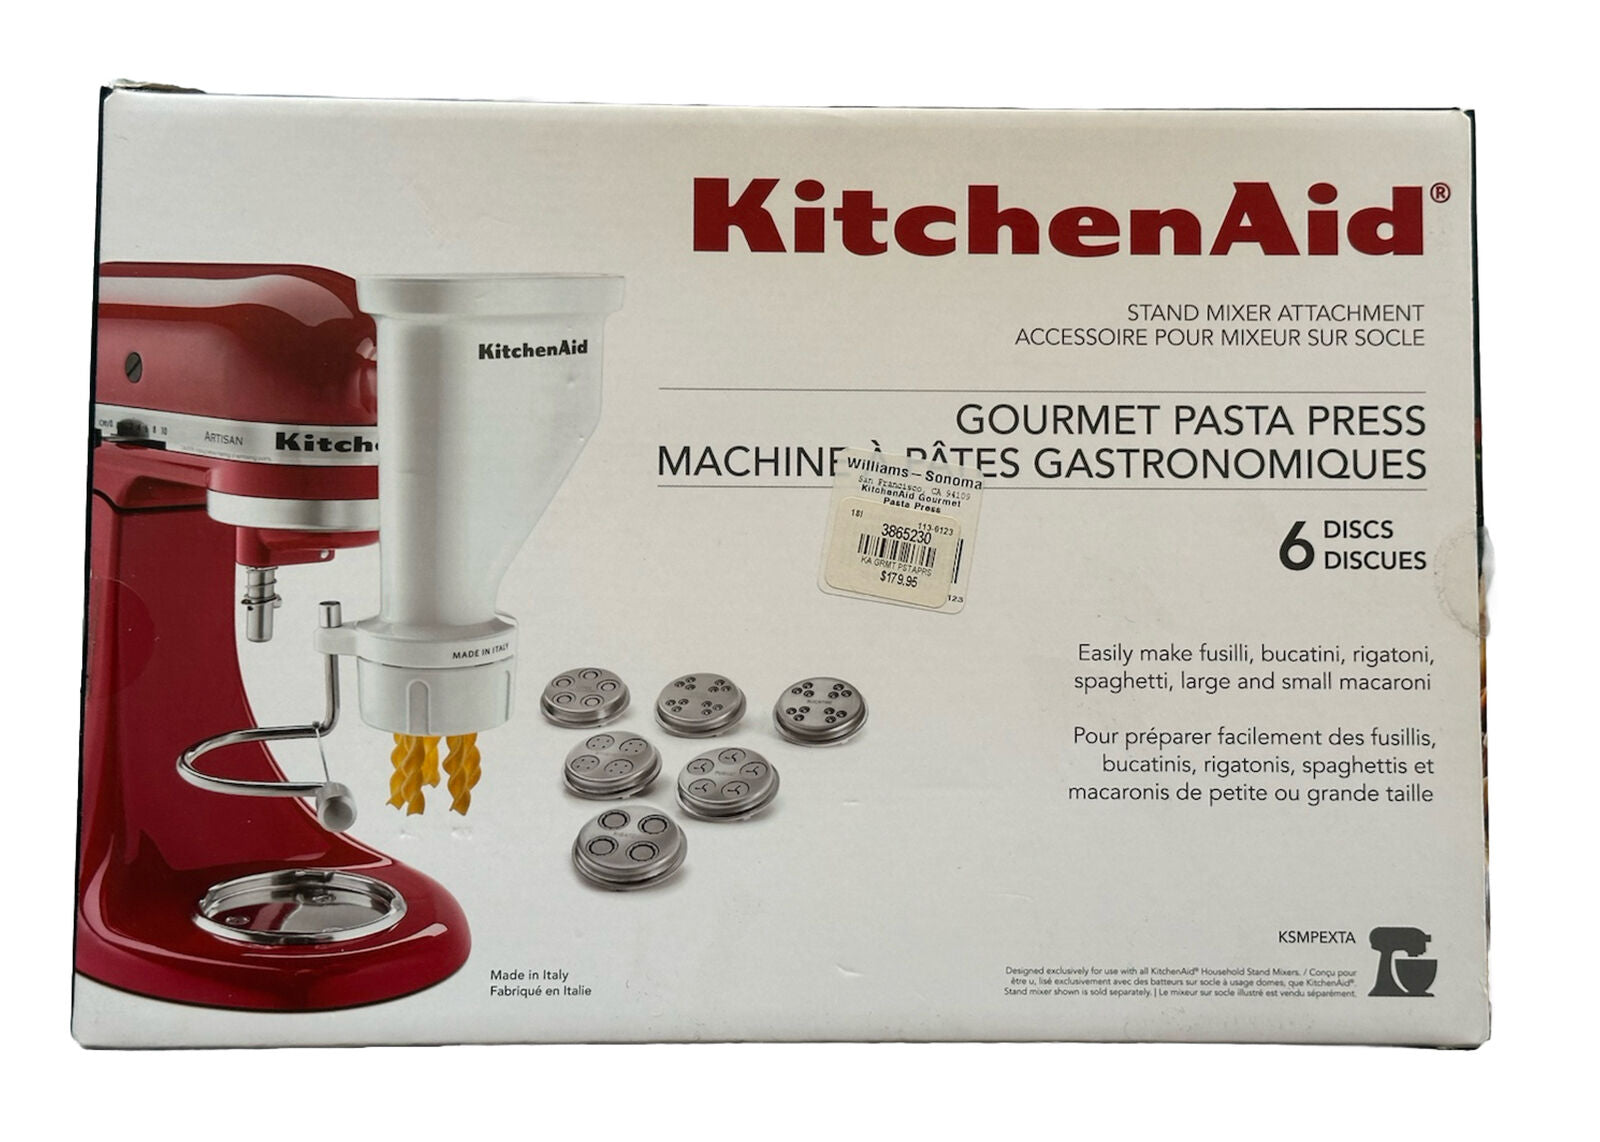 New KitchenAid Gourmet Pasta Press Stand Mixer Attachment KSMPEXTA Made in Italy